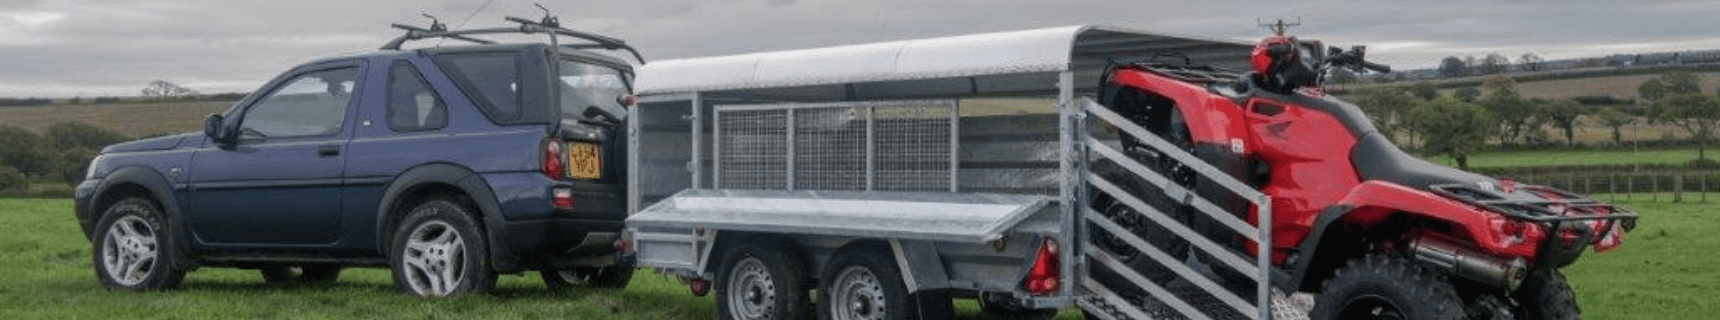 CLH Livestock Canopy Trailer – Braked Axle Head Image